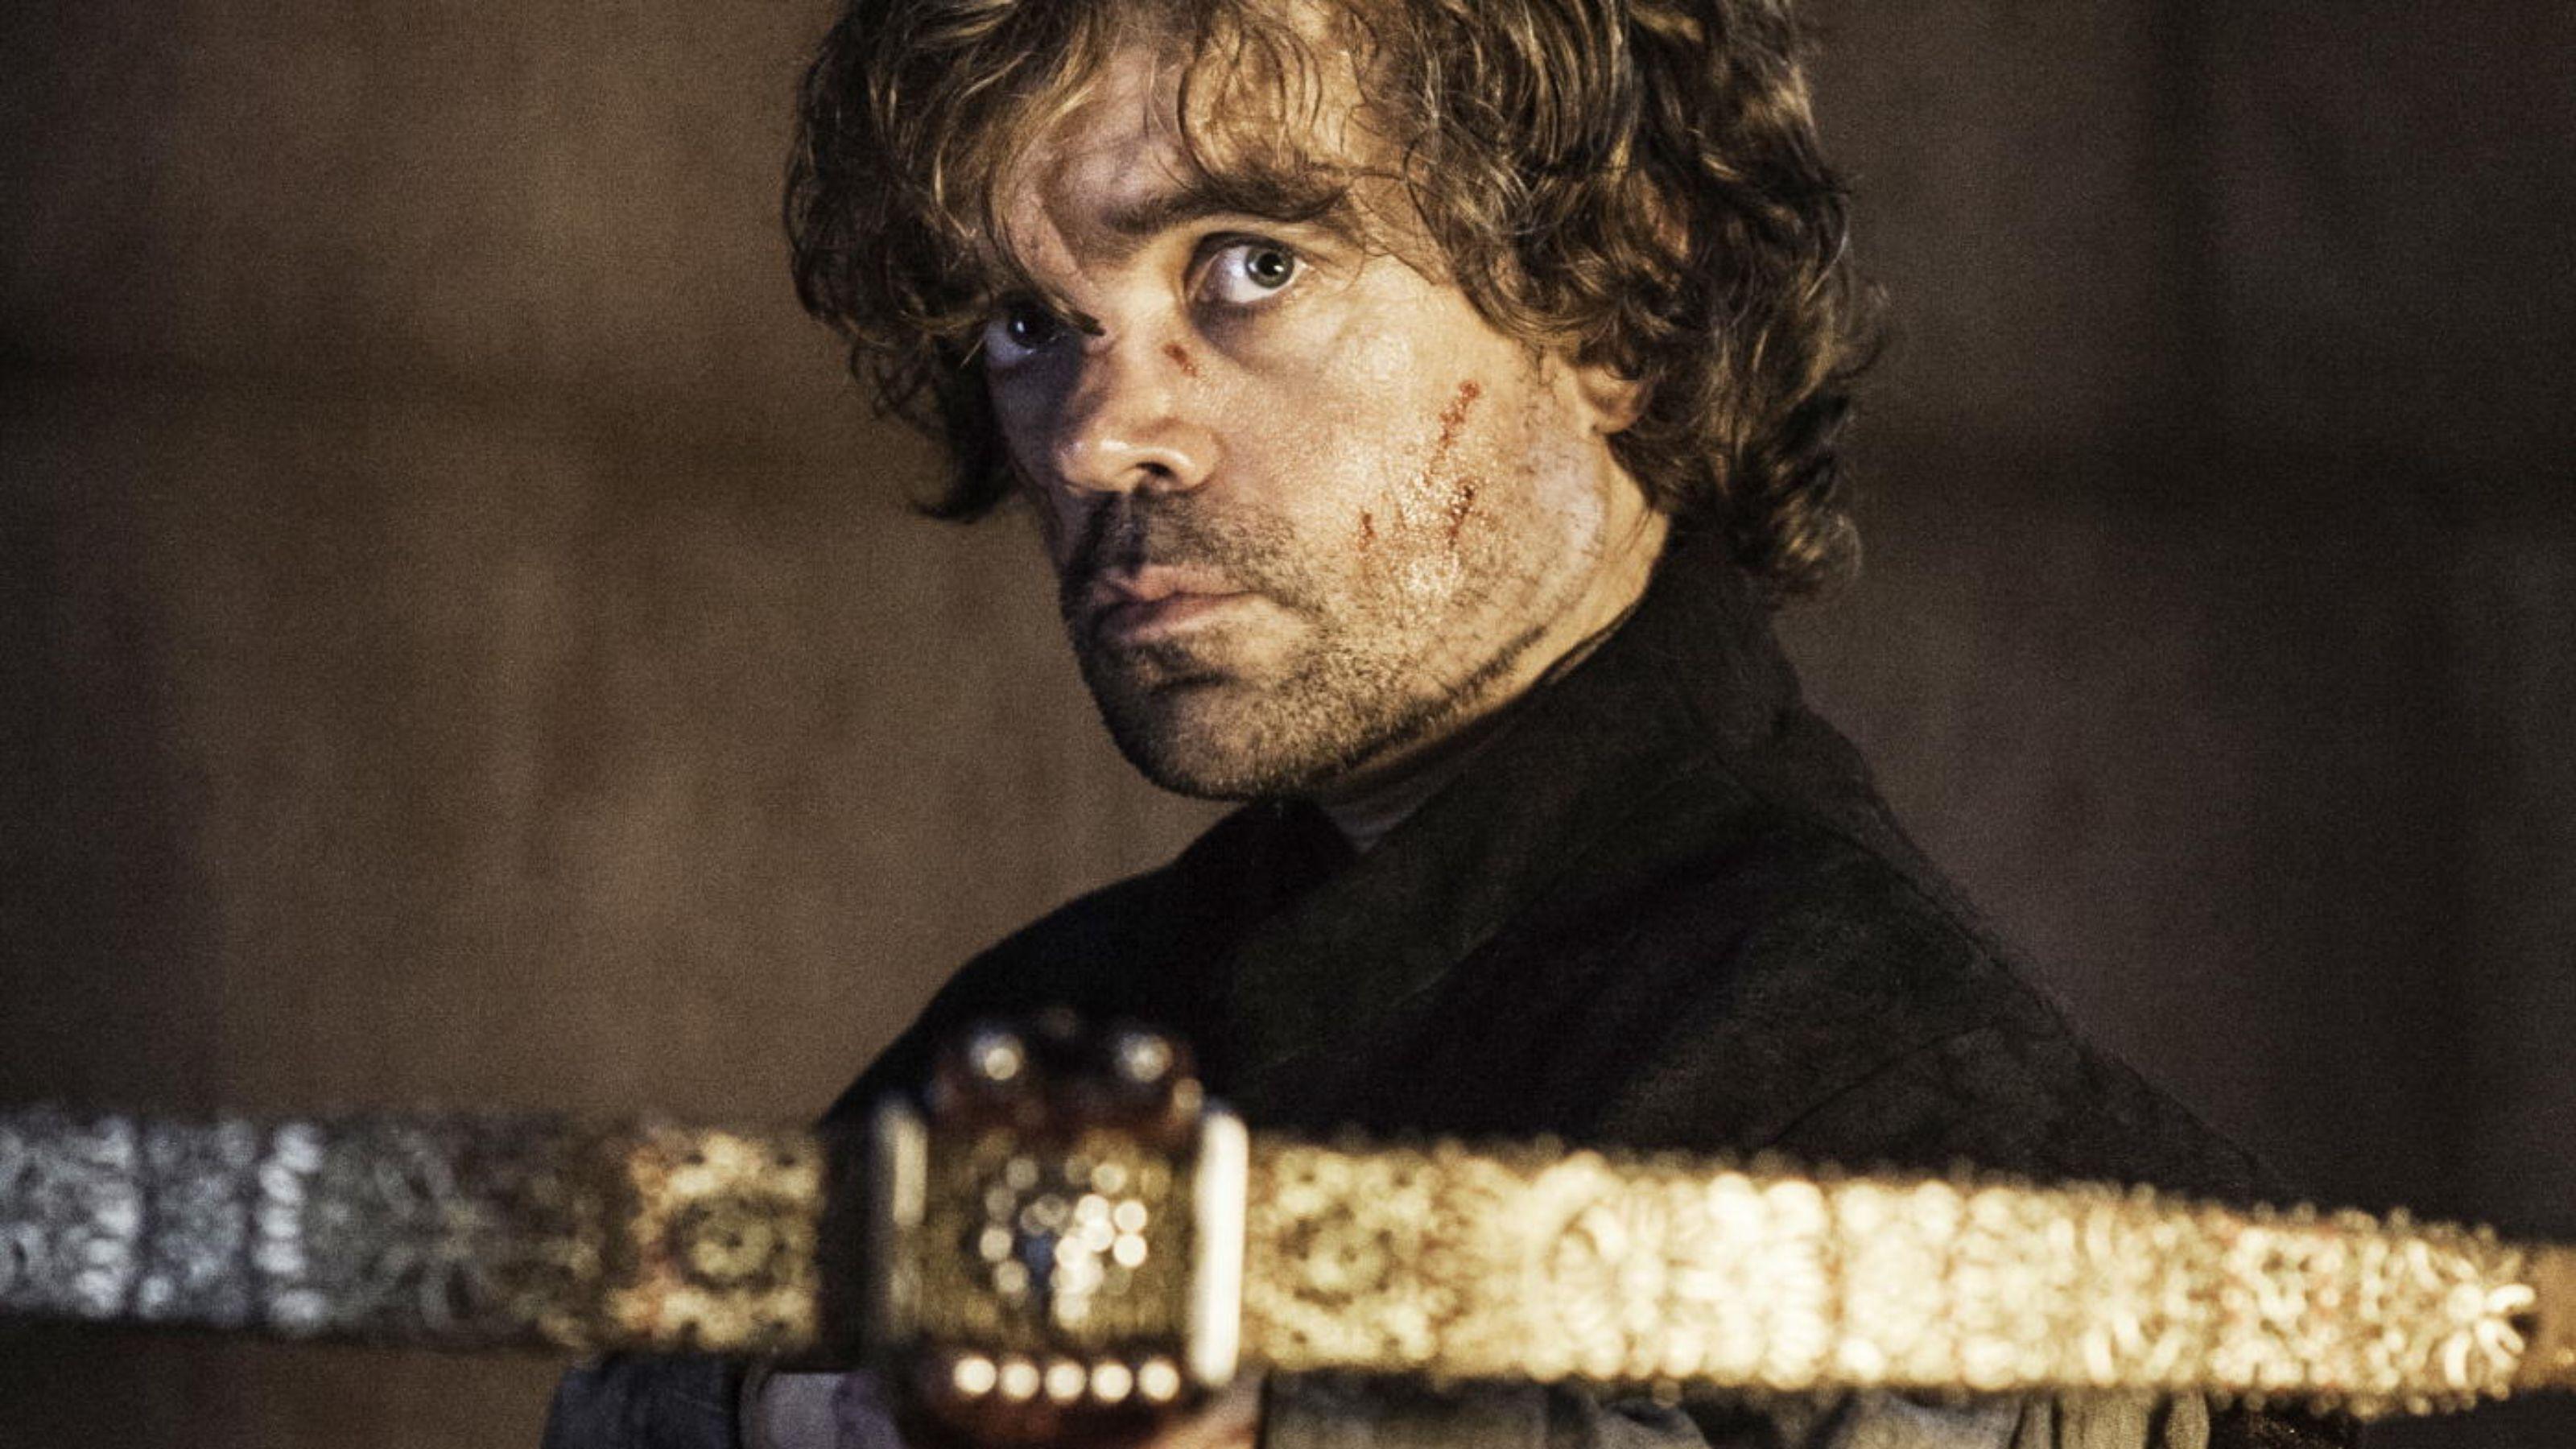 Tyrion Lannister with a crossbow wallpaper and image